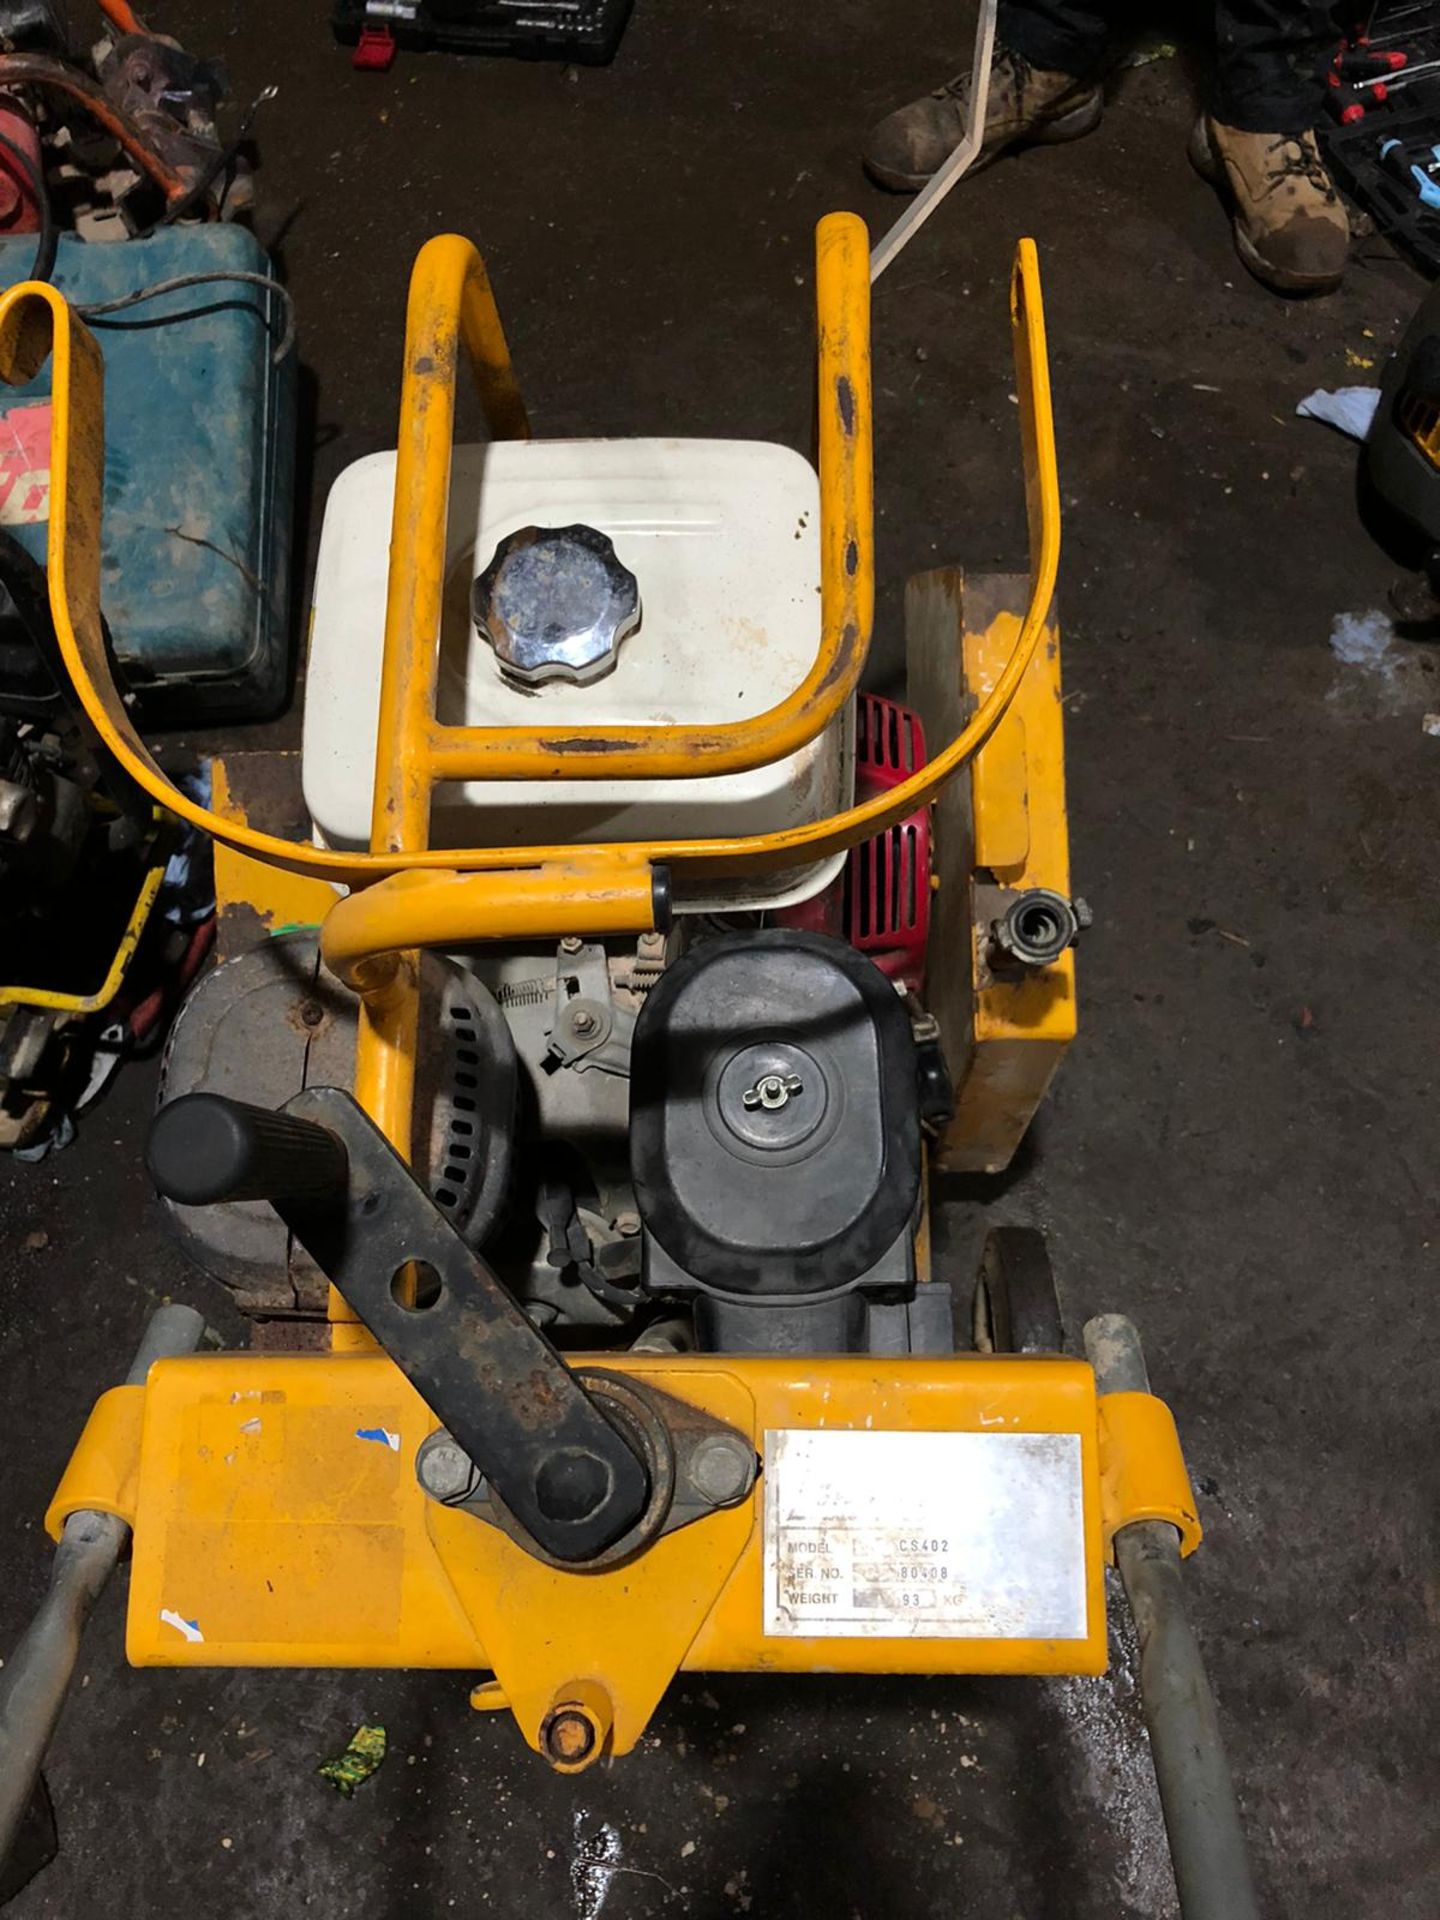 SHATAL CS402 FLOOR/ROAD SAW, HONDA GX390 ENGINE, RUNS AND WORKS WELL, IN GOOD CONDITION *NO VAT* - Image 5 of 5